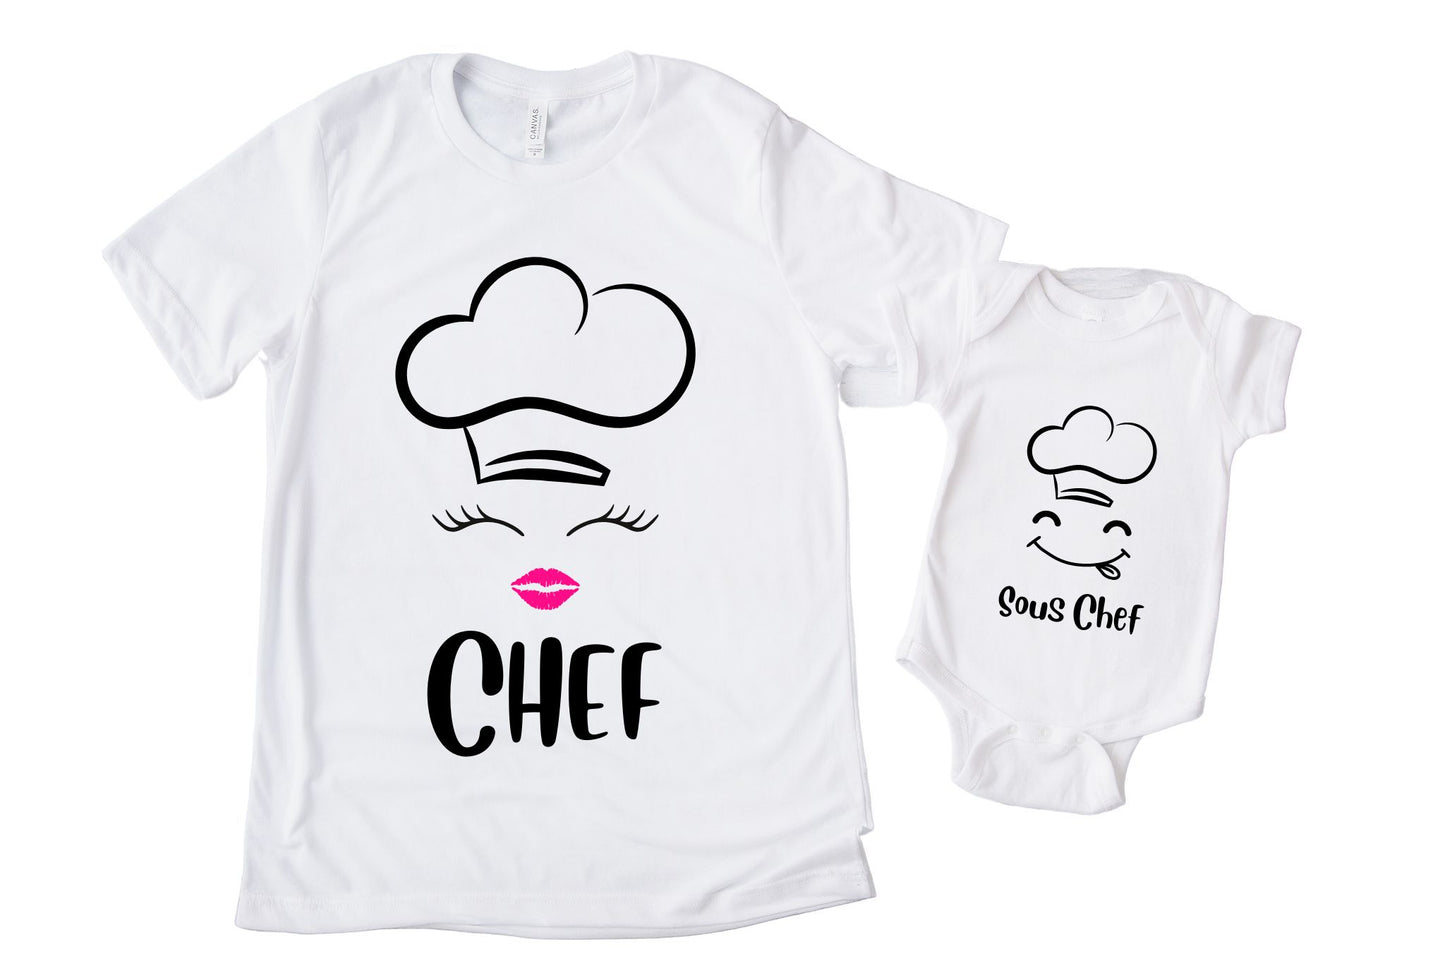 Chef & Sous Chef Mommy and Me Matching Shirt Set